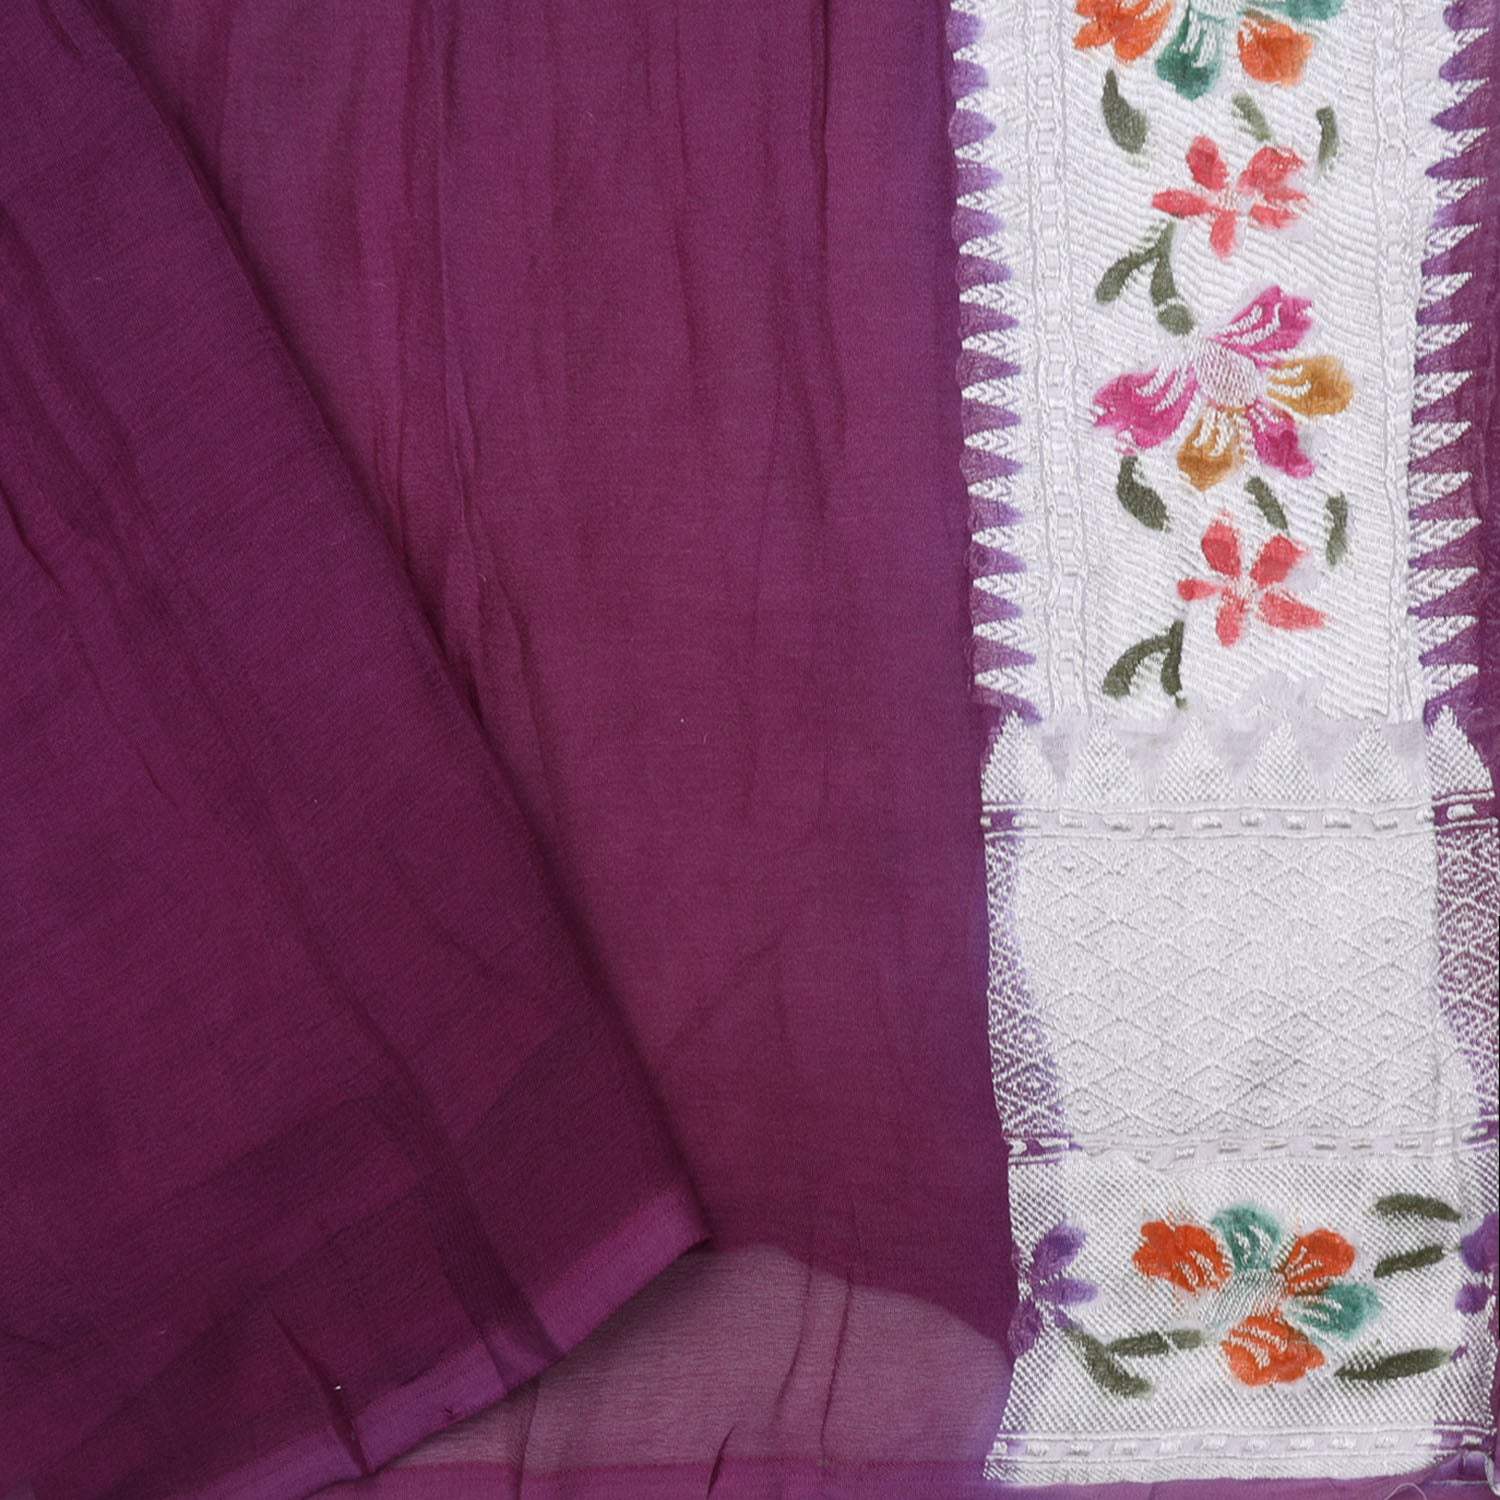 Daisy White Georgette Banarasi Saree With Floral Pattern - Singhania's